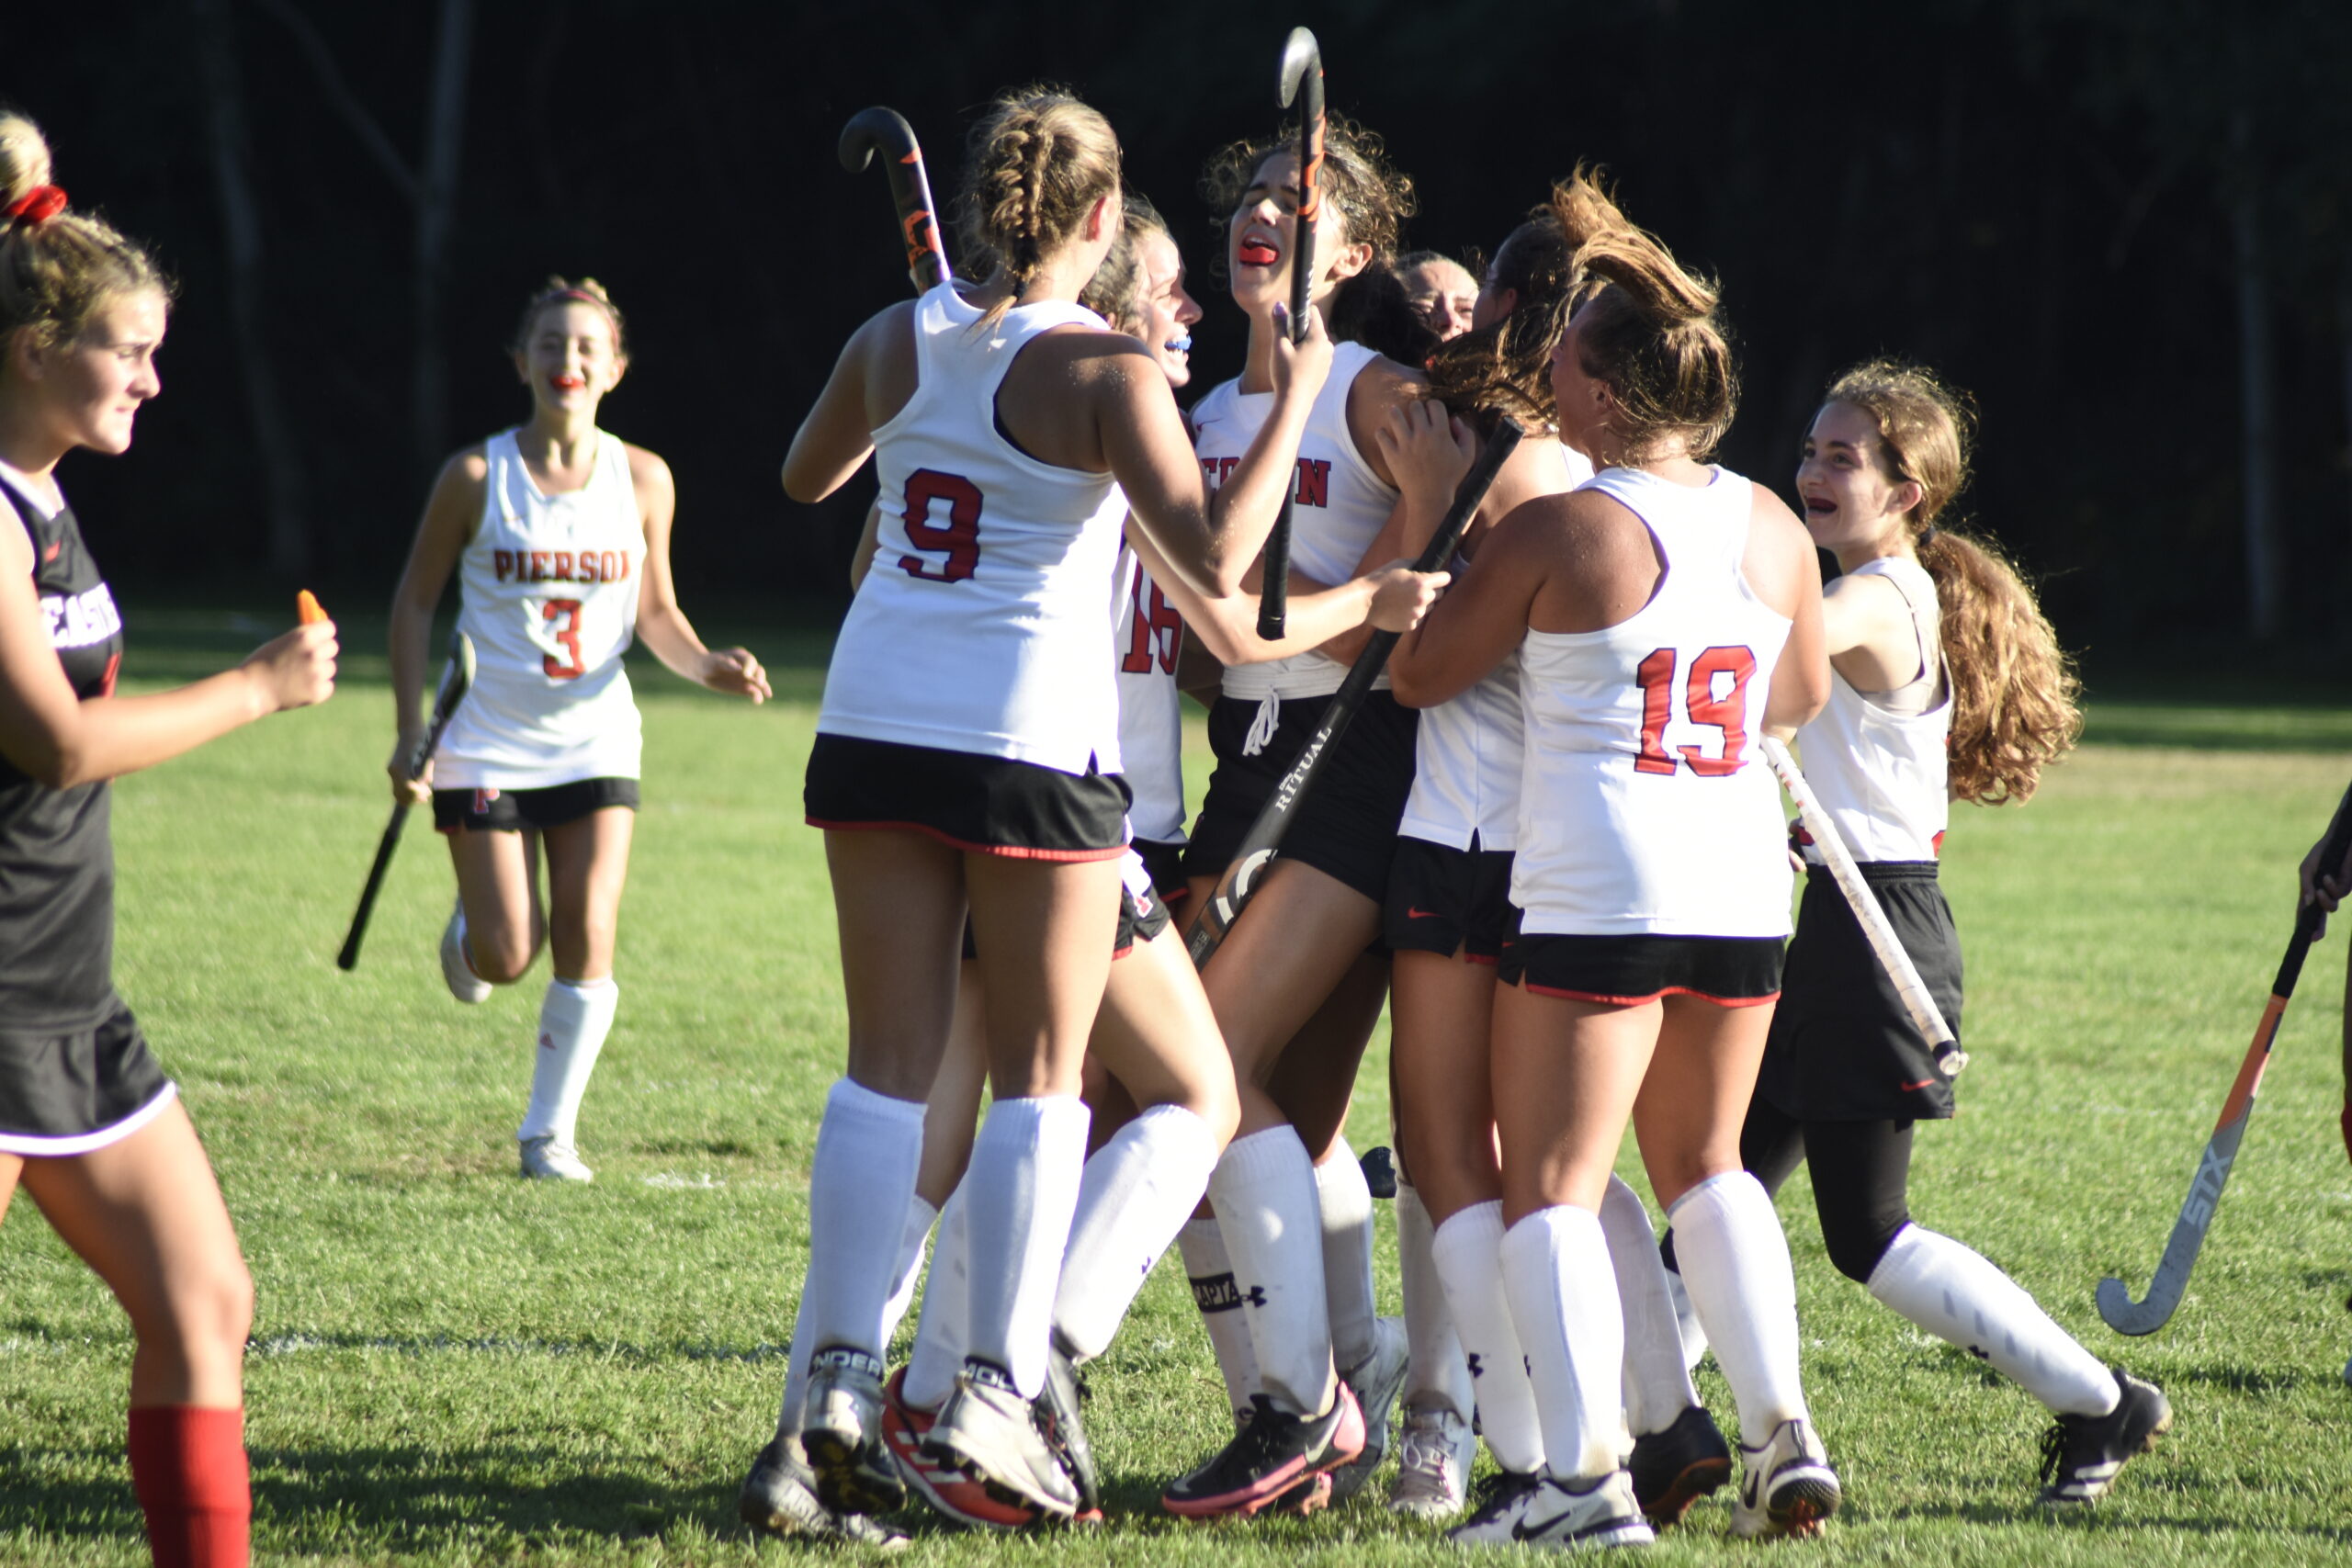 The Whalers celebrate Sophia Beech’s goal that gave them a late 1-0 lead, leading to their 2-0 victory over Islip on September 8.   DREW BUDD